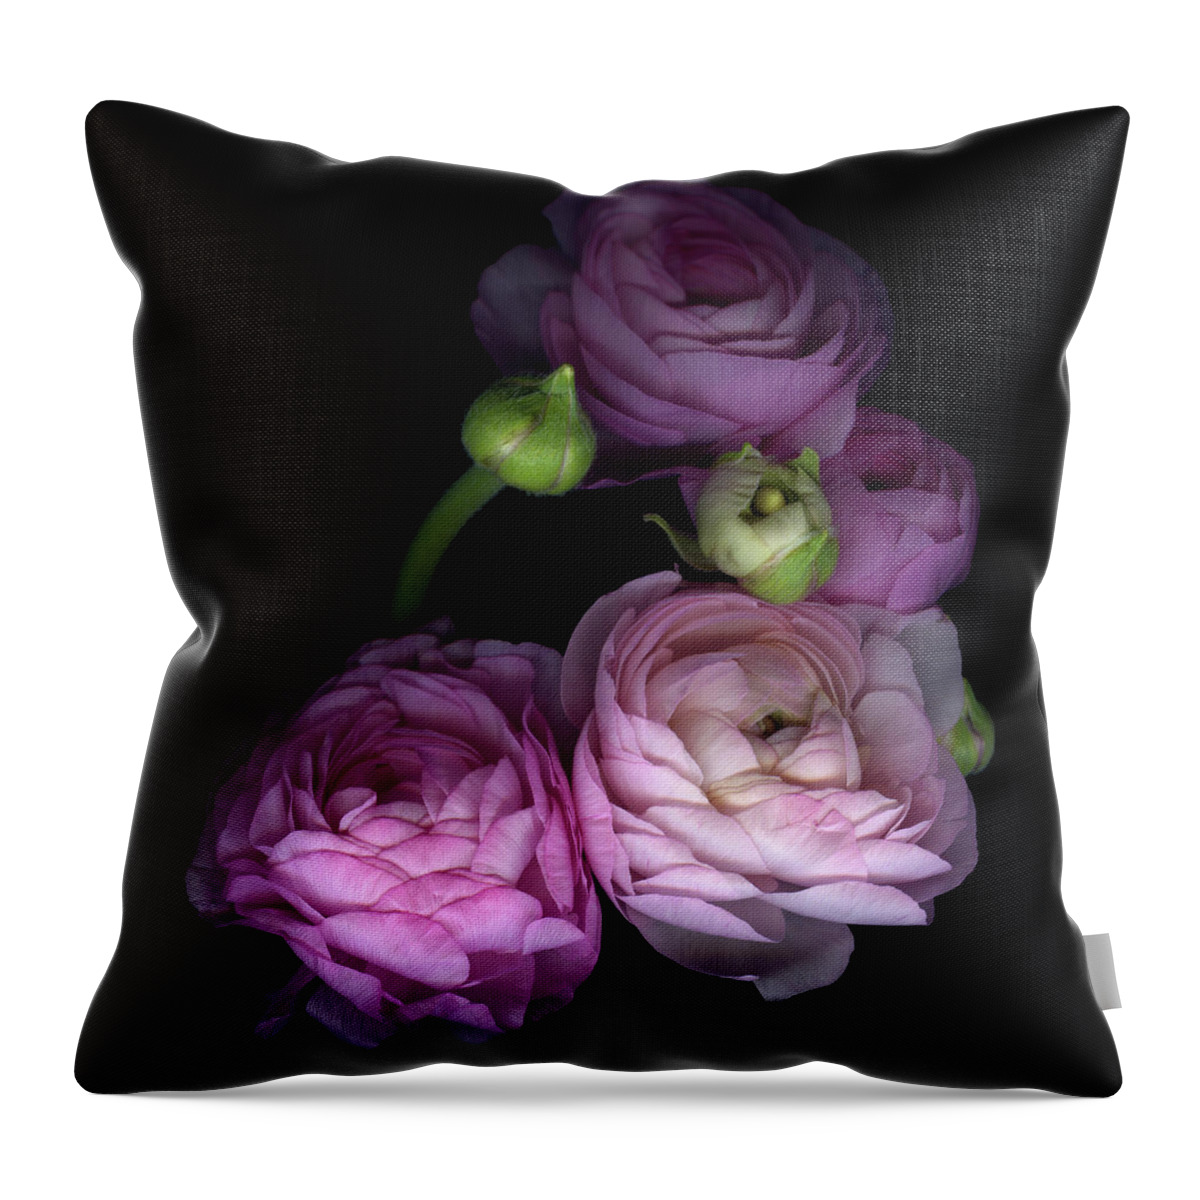 Bud Throw Pillow featuring the photograph Pinkalicius Ranunculus... Pink For by Photograph By Magda Indigo